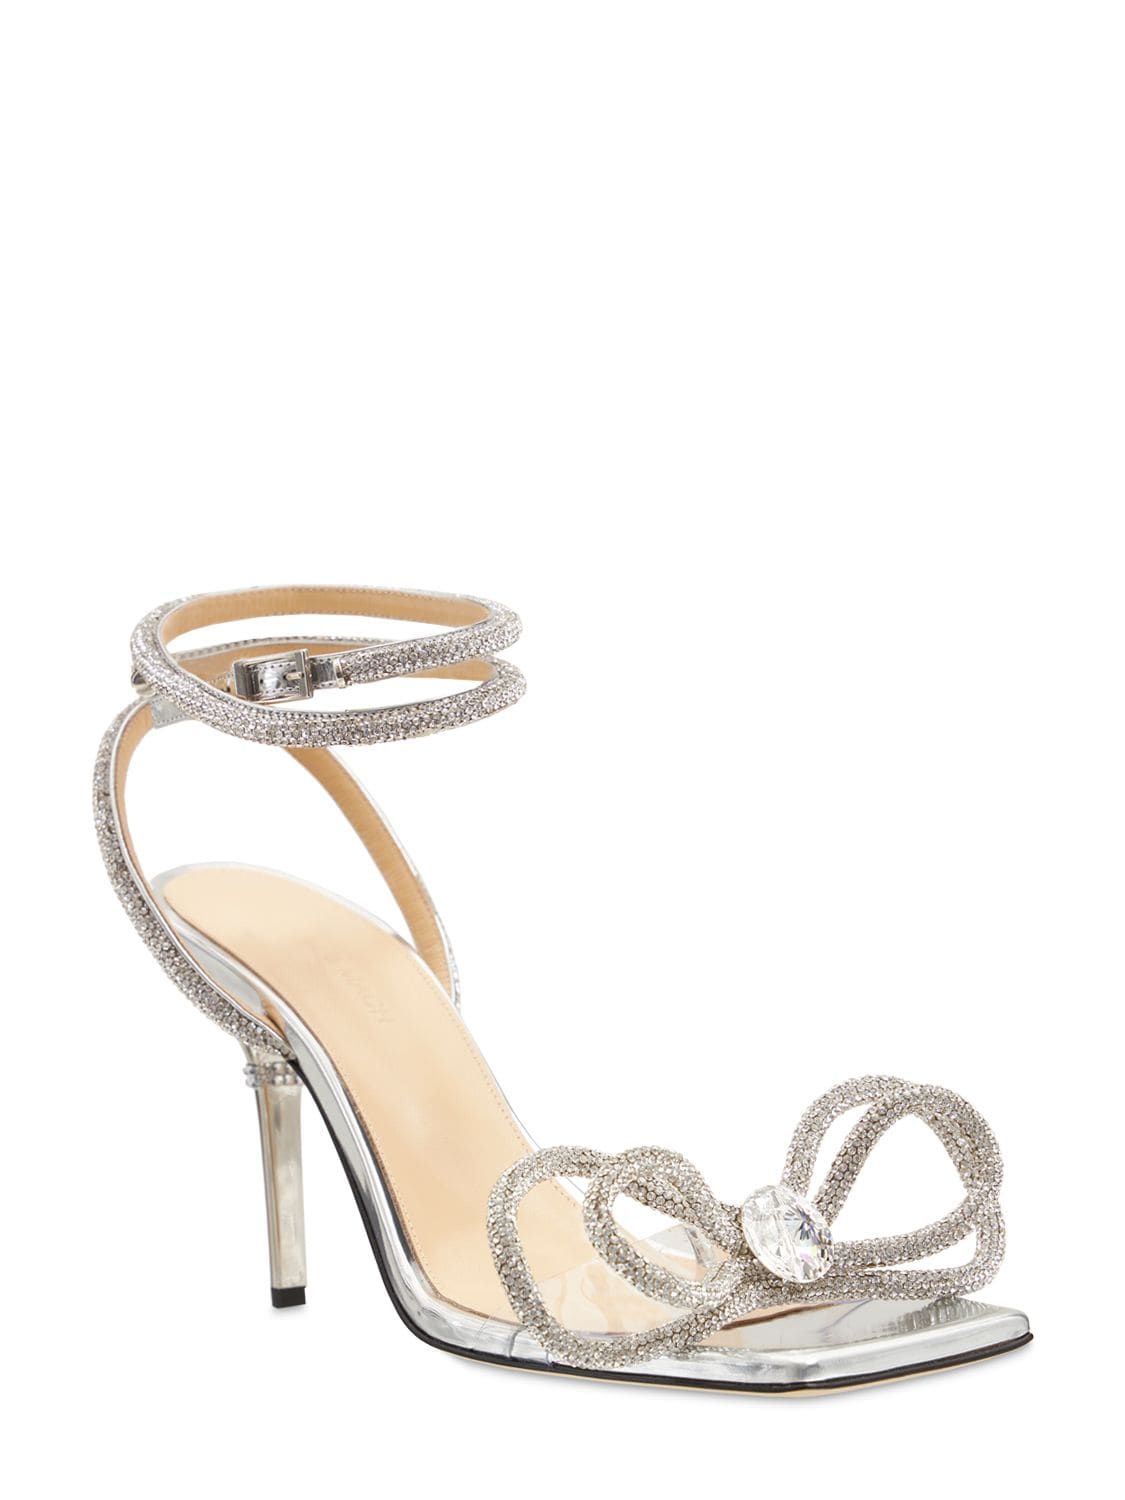 Shop Mach & Mach 95mm Double Bow Leather & Pvc Sandals In Silver